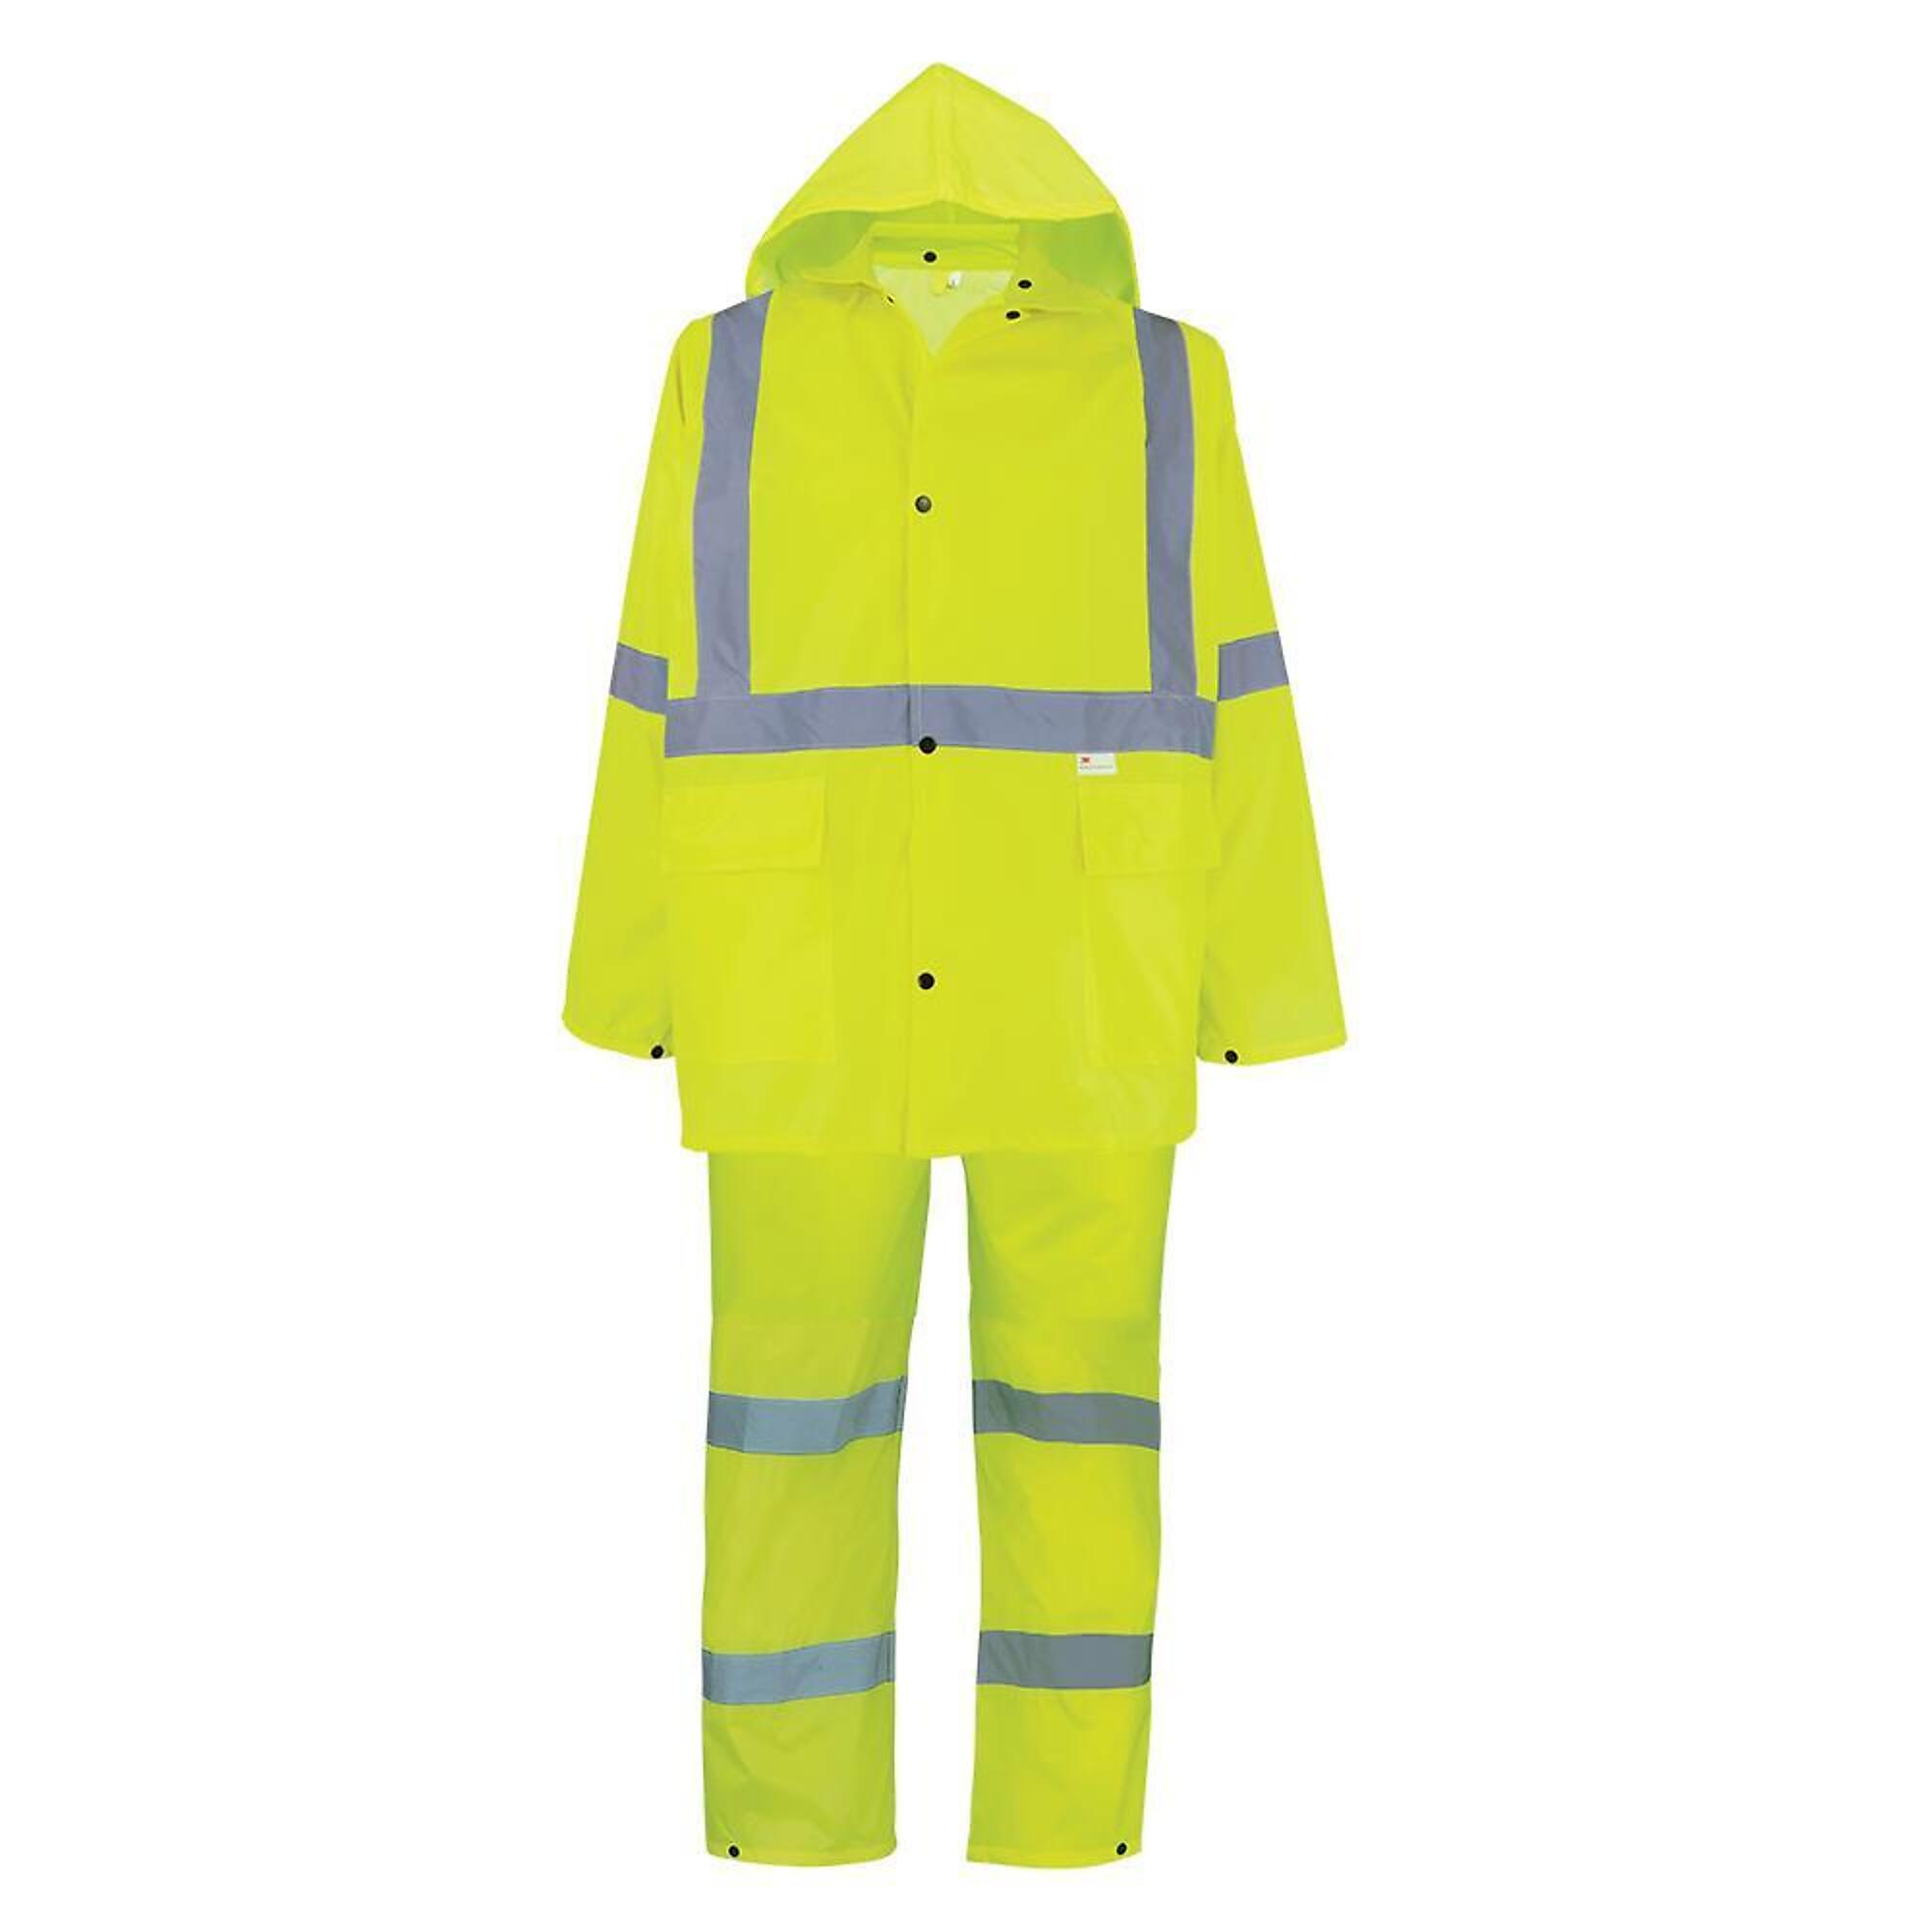 FrogWear, HV Yellow/Green, Class 3 Three-Piece Rain Suit, Size 2XL, Color High-Visibility Yellow/Green, Model GLO-8000-2XL